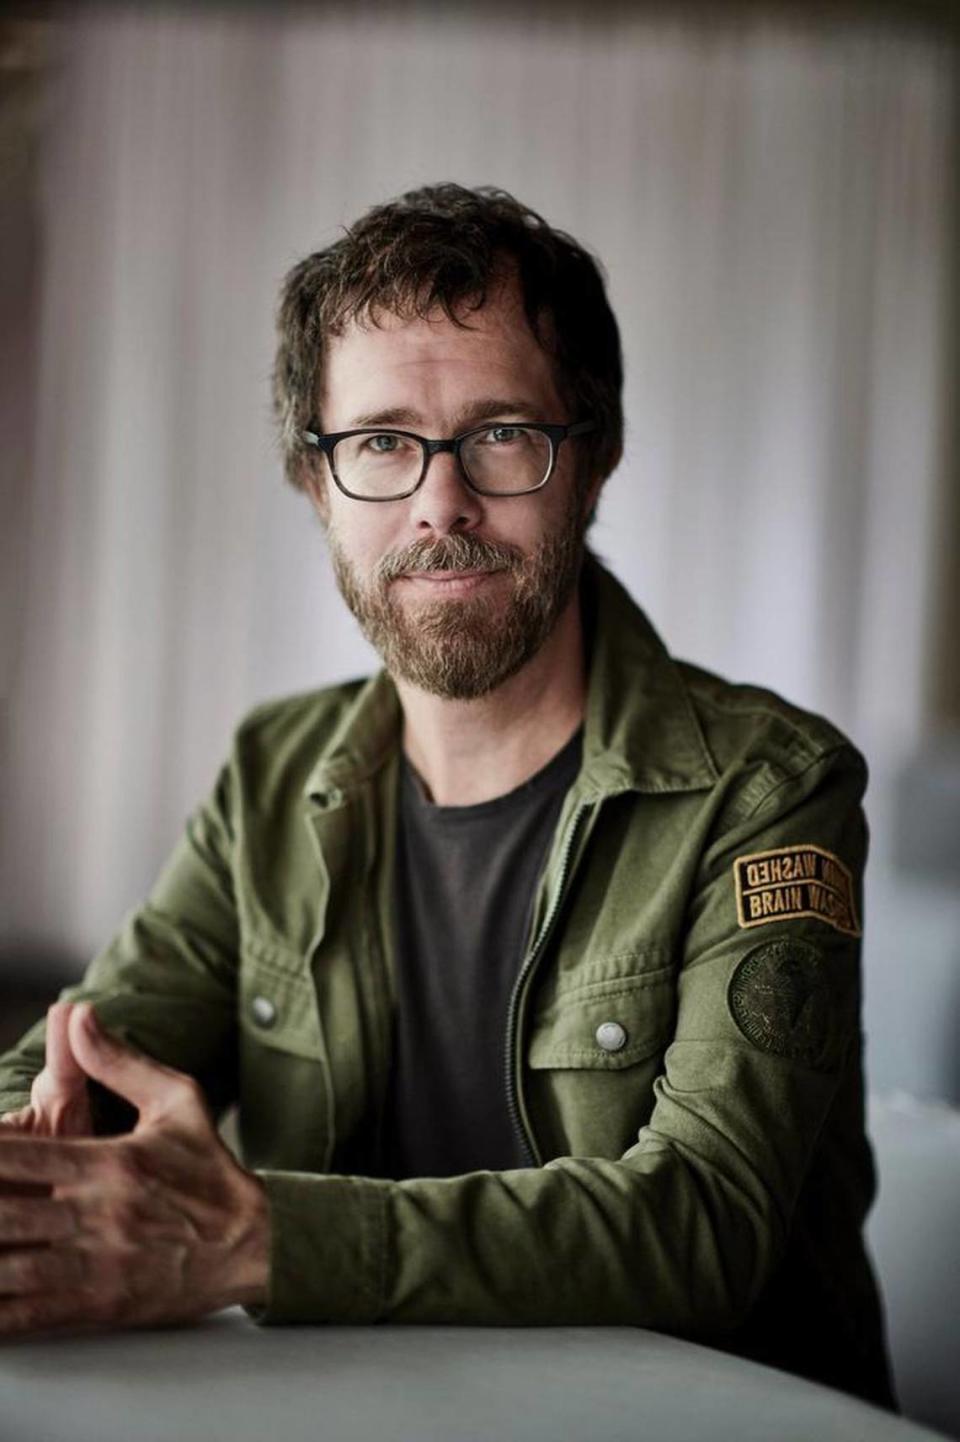 Singer-songwriter Ben Folds will perform with the Kansas City Symphony on Oct. 5-6 at the Kauffman Center for the Performing Arts.